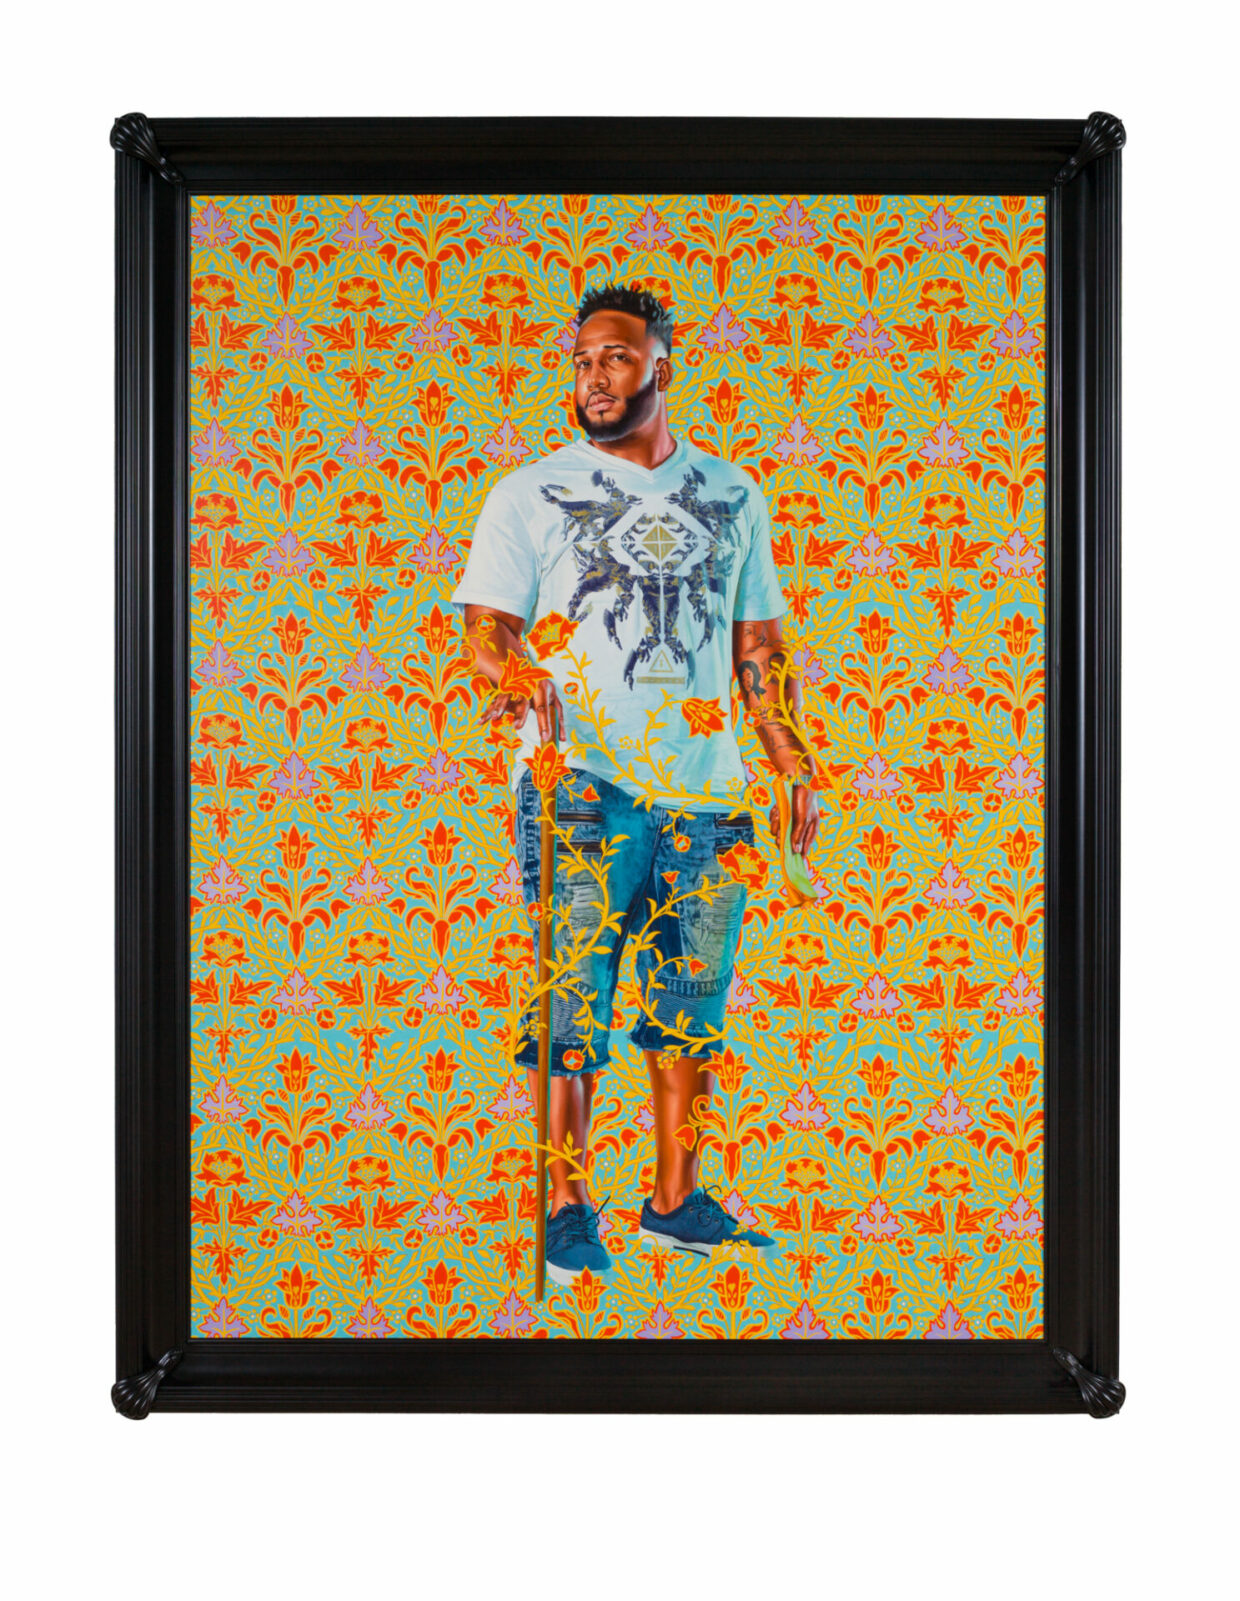 Kehinde Wiley: ‘When I first started painting black women, it was a return home’ | 9